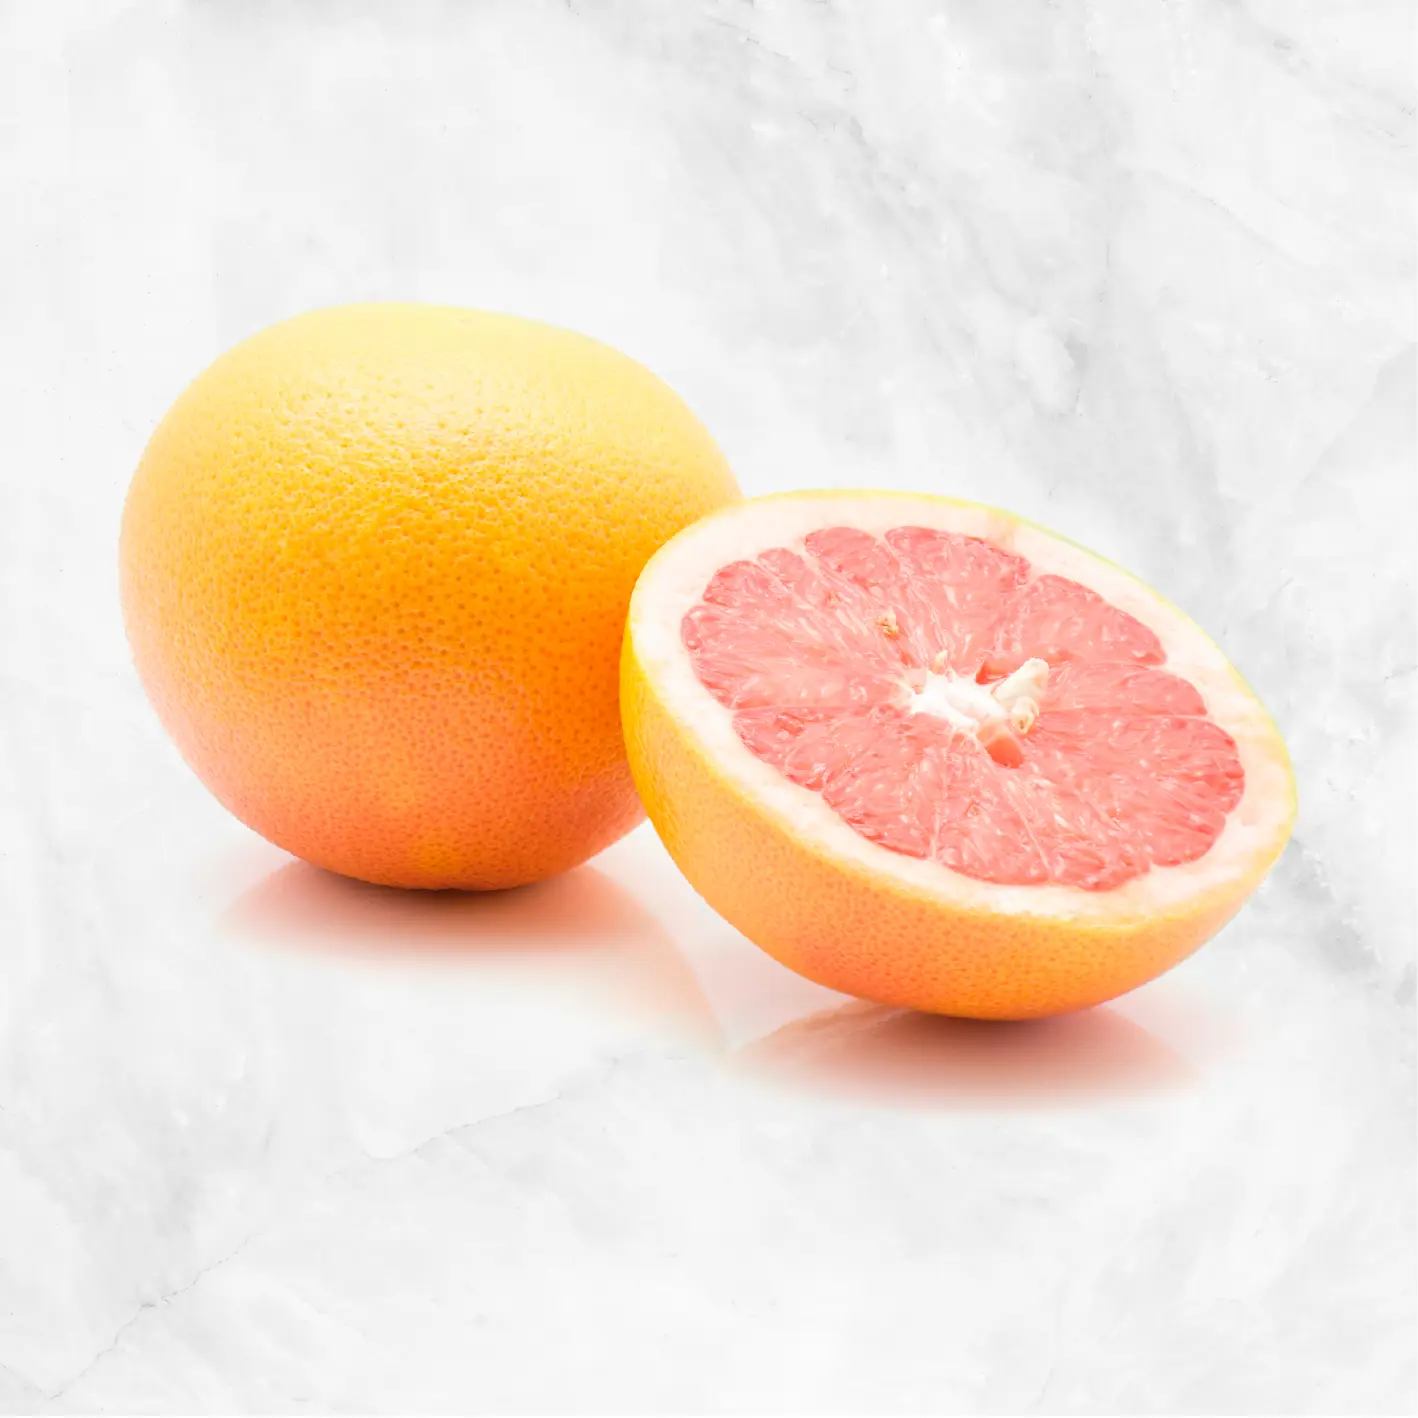 Star Ruby Grapefruit Delivery